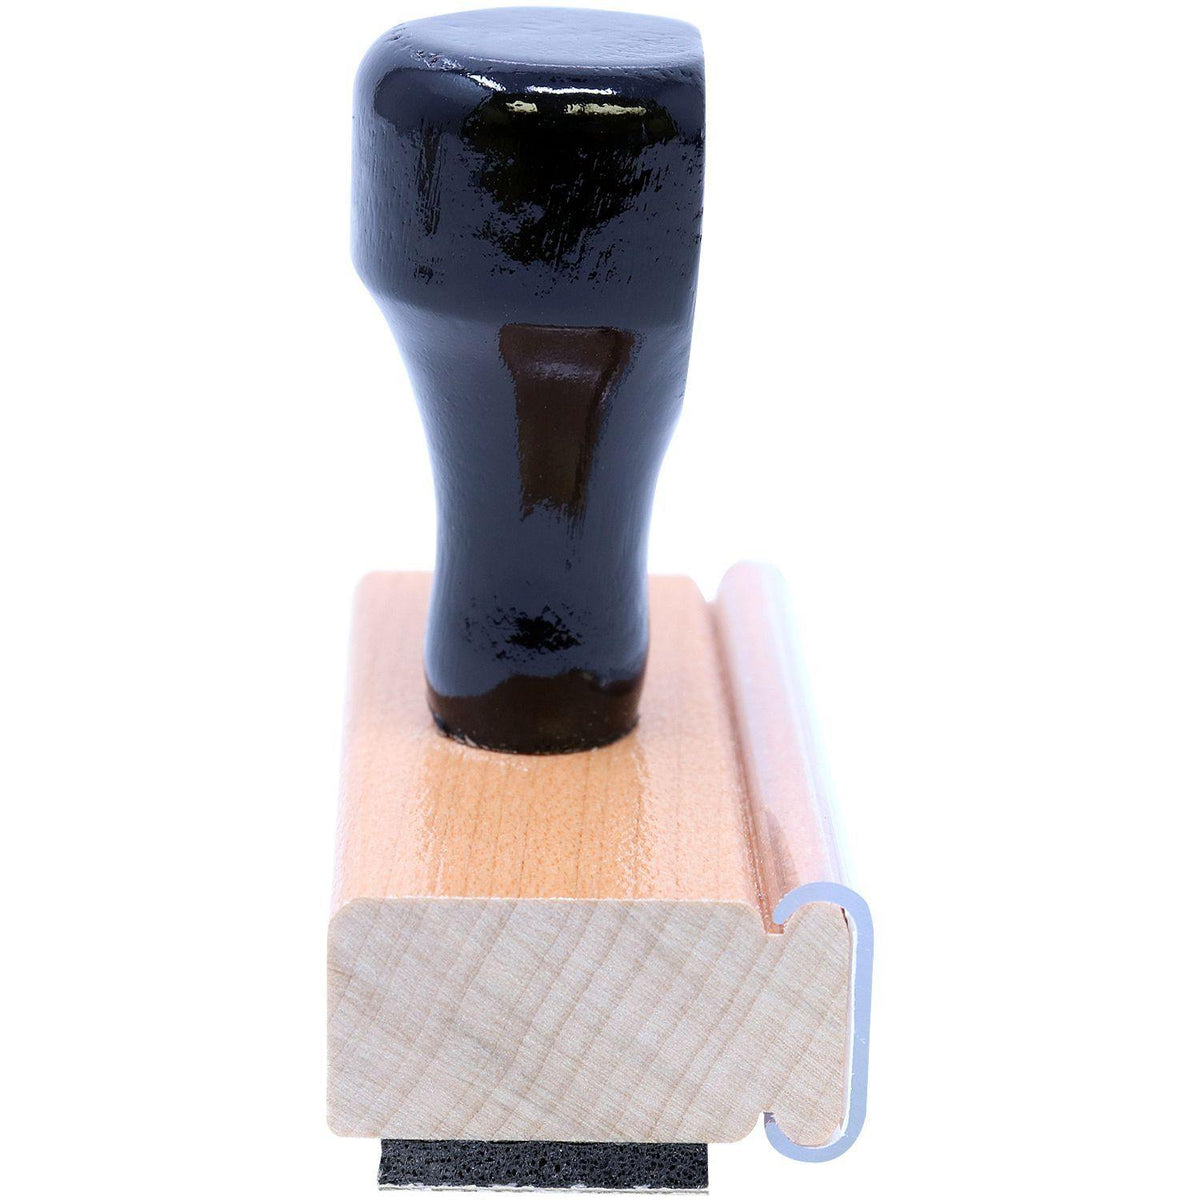 Postal Fragile Rubber Stamp - Engineer Seal Stamps - Brand_Acorn, Impression Size_Small, Stamp Type_Regular Stamp, Type of Use_Postal &amp; Mailing, Type of Use_Shipping &amp; Receiving